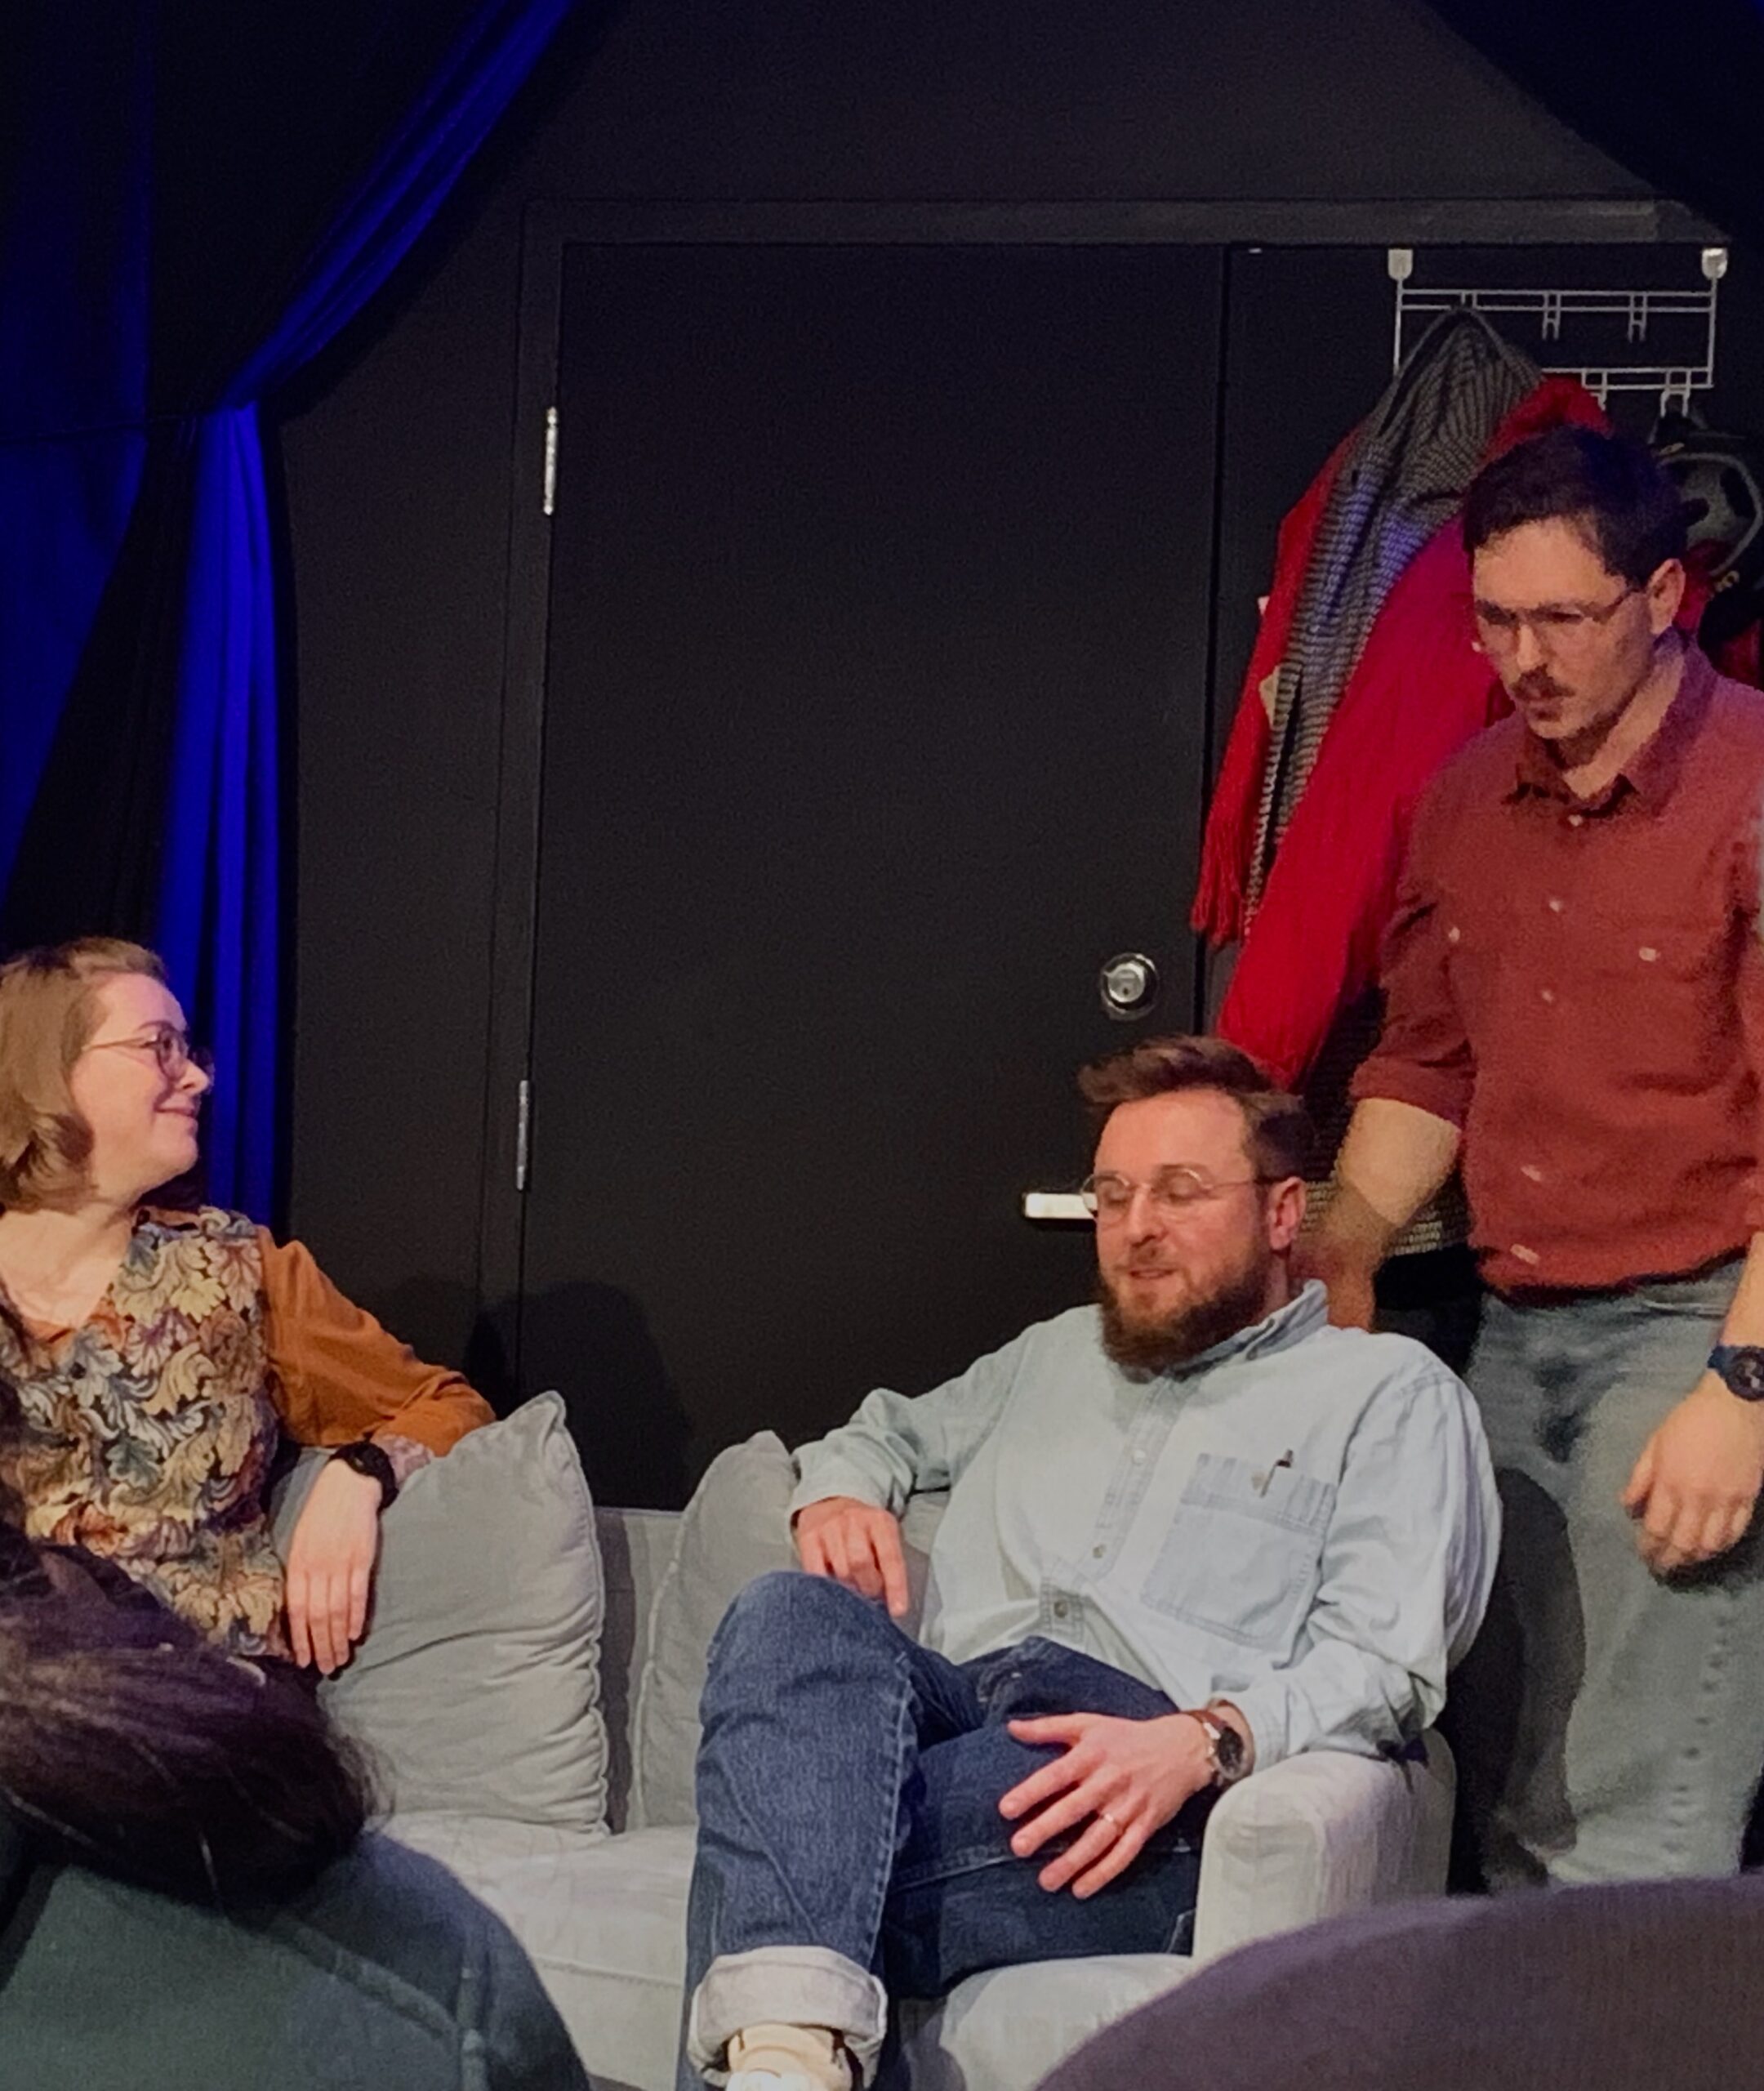 On a stage, two actors sit on a couch while one stands.